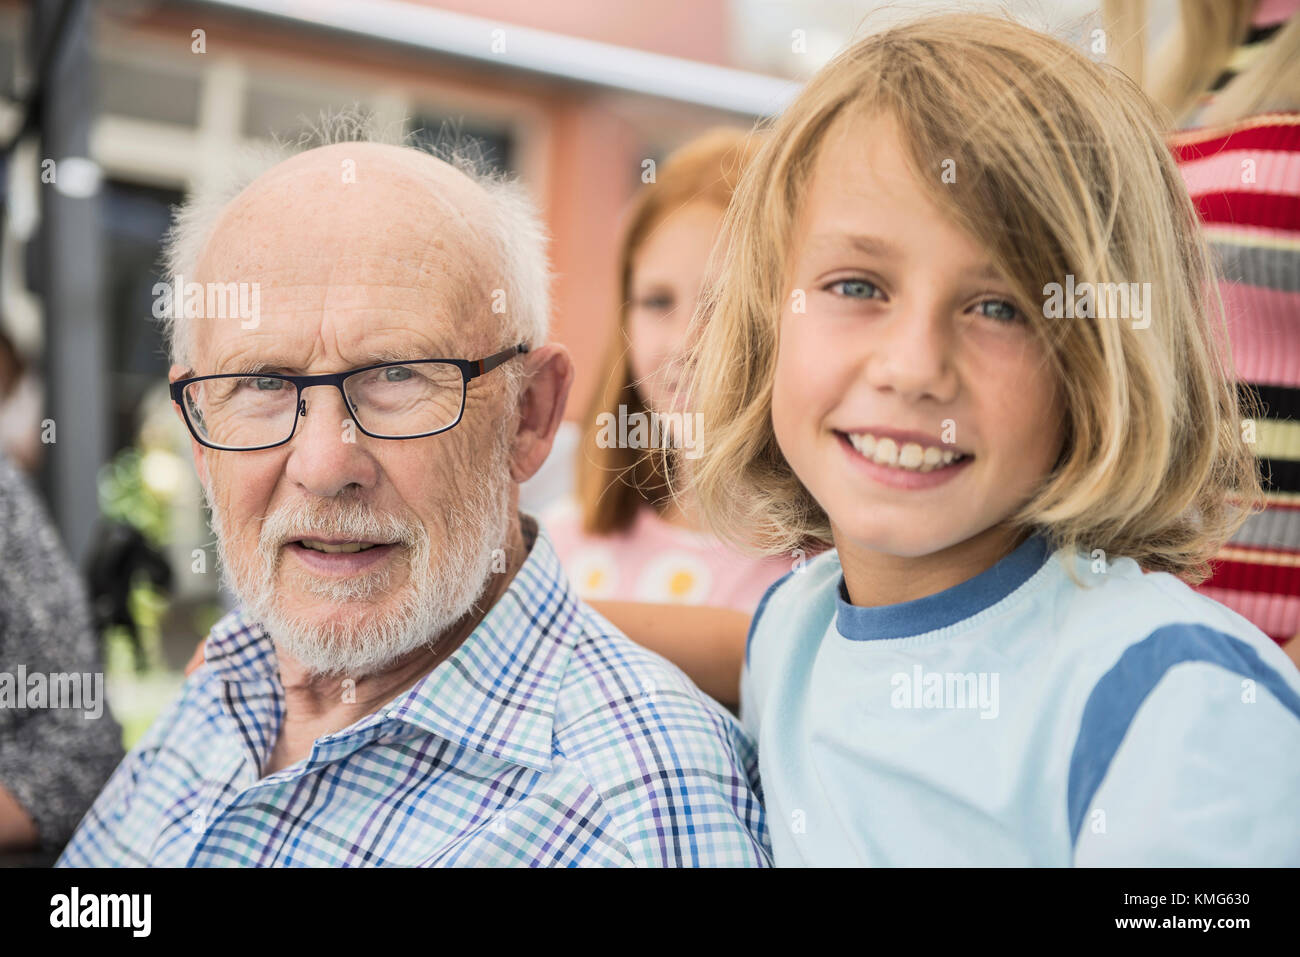 Portrait of grandfather with grandson Stock Photo